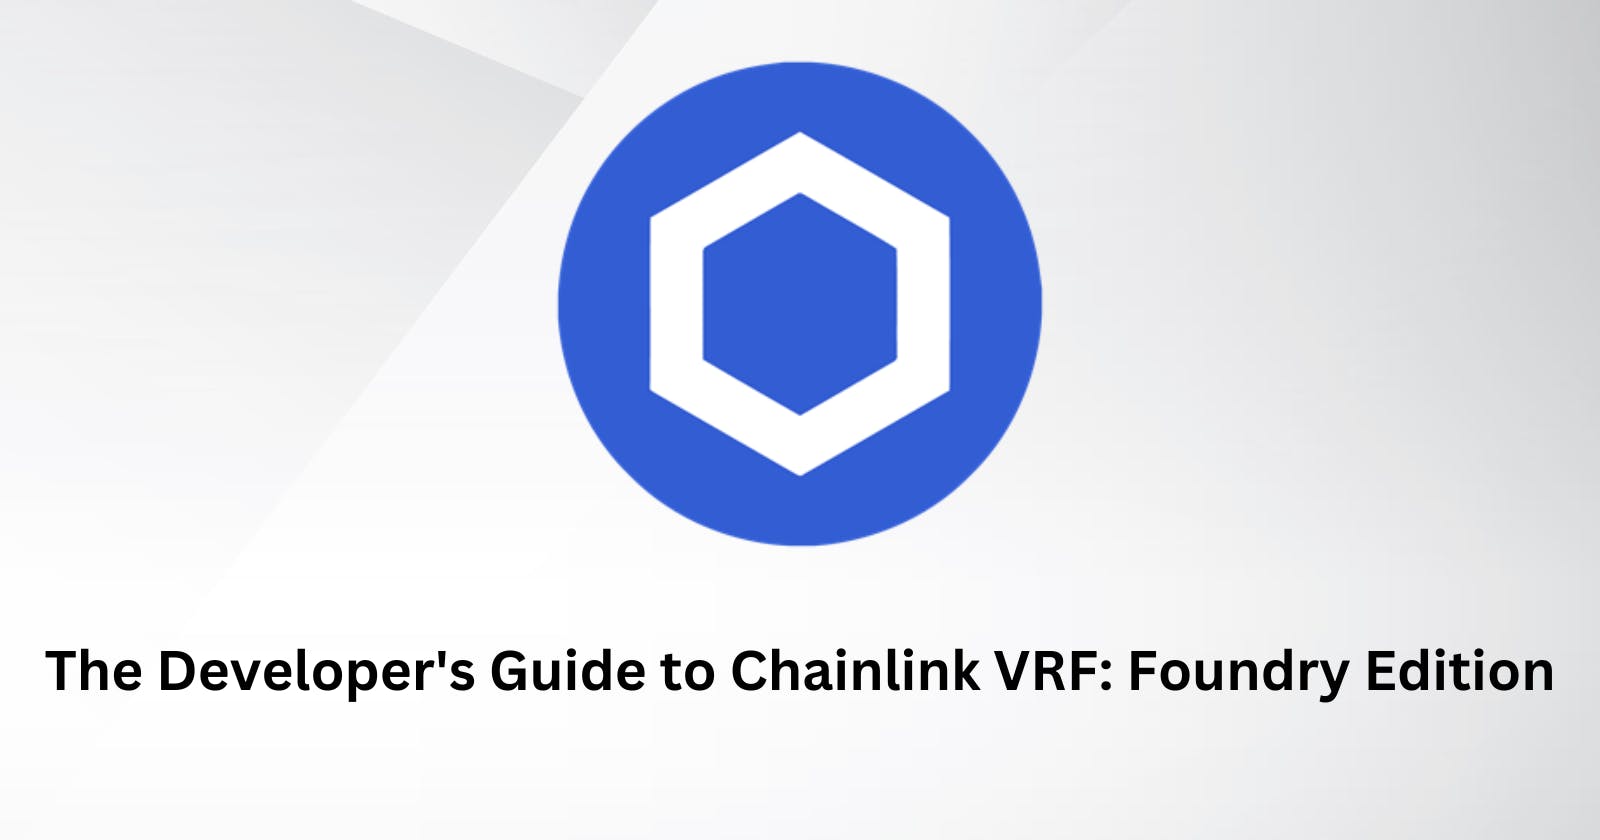 The Developer's Guide to Chainlink VRF: Foundry Edition